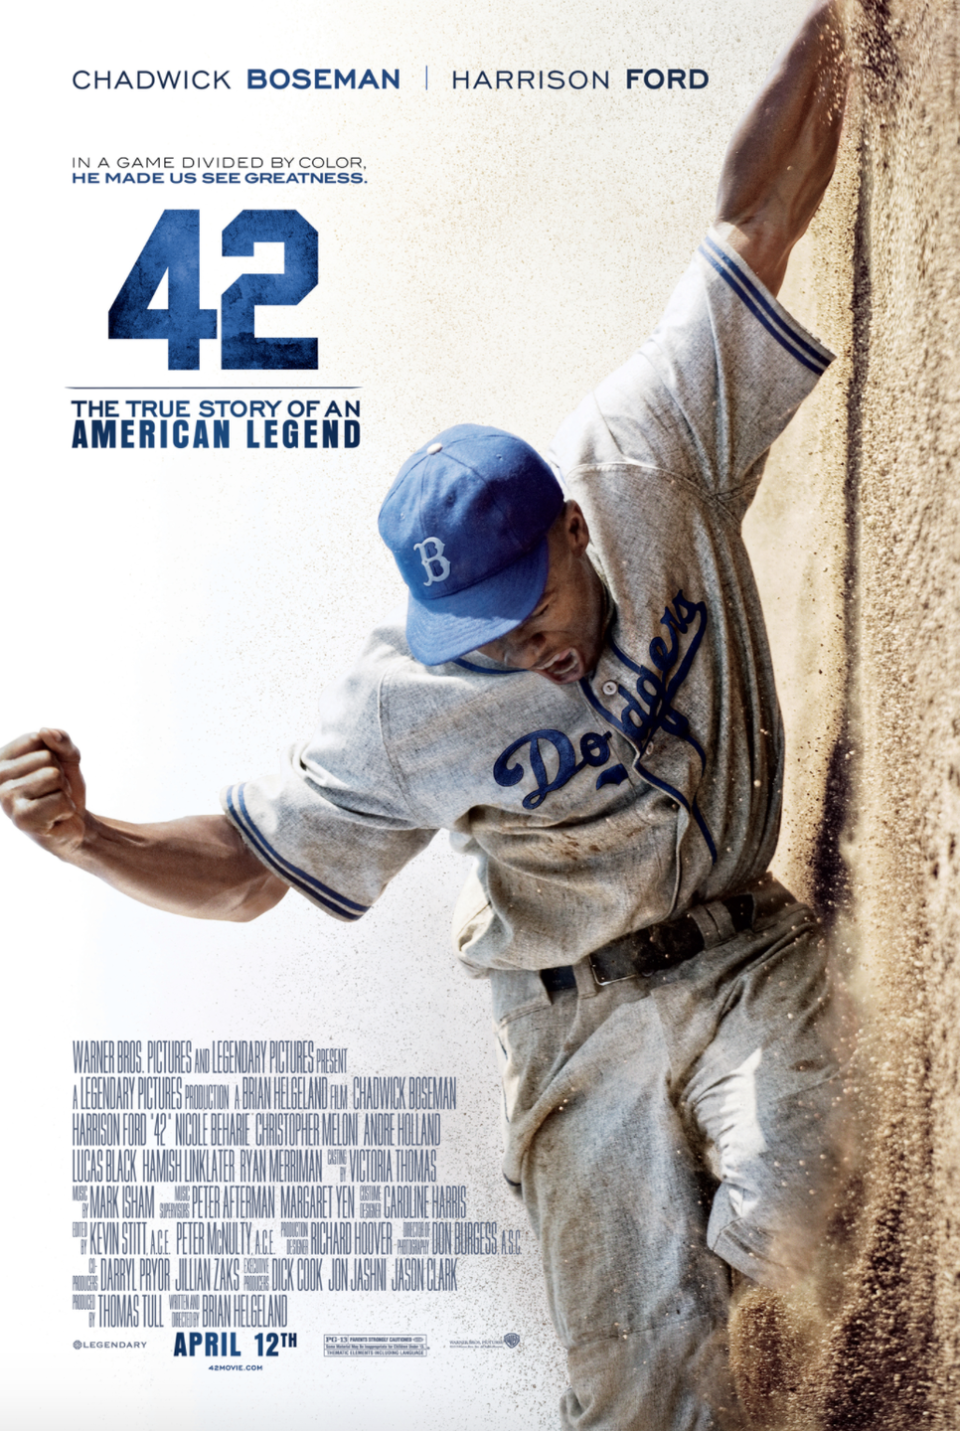 <p>This exciting and emotional sports story gives audience members an insight into the life of the great Jackie Robinson (Chadwick Boseman), the first Black athlete to play in Major League Baseball after signing to the Brooklyn Dodgers in 1947. This decision is not only heralded as the end of racial segregation in professional baseball, since Black players were forced to play in separate leagues before this, but shows Jackie's influence and contributions to the ongoing civil rights movement.</p><p><a class="link " href="https://www.amazon.com/42-Chadwick-Boseman/dp/B00DYQ2PH8?tag=syn-yahoo-20&ascsubtag=%5Bartid%7C10055.g.40299603%5Bsrc%7Cyahoo-us" rel="nofollow noopener" target="_blank" data-ylk="slk:Amazon">Amazon</a></p><p> <a class="link " href="https://go.redirectingat.com?id=74968X1596630&url=https%3A%2F%2Ftv.apple.com%2Fus%2Fmovie%2F42%2Fumc.cmc.2mud5xputvdzmd2revxzmkajt%3Faction%3Dplay&sref=https%3A%2F%2Fwww.goodhousekeeping.com%2Flife%2Fentertainment%2Fg40299603%2Fbest-historical-movies%2F" rel="nofollow noopener" target="_blank" data-ylk="slk:Apple TV">Apple TV</a></p><p> <a class="link " href="https://go.redirectingat.com?id=74968X1596630&url=https%3A%2F%2Fplay.hbomax.com%2Fpage%2Furn%3Ahbo%3Apage%3Ahome%3Fcamp%3DgoogleHBOMAX&sref=https%3A%2F%2Fwww.goodhousekeeping.com%2Flife%2Fentertainment%2Fg40299603%2Fbest-historical-movies%2F" rel="nofollow noopener" target="_blank" data-ylk="slk:HBO Max">HBO Max</a></p><p> <a class="link " href="https://www.netflix.com/title/70259169" rel="nofollow noopener" target="_blank" data-ylk="slk:Netflix">Netflix</a></p>